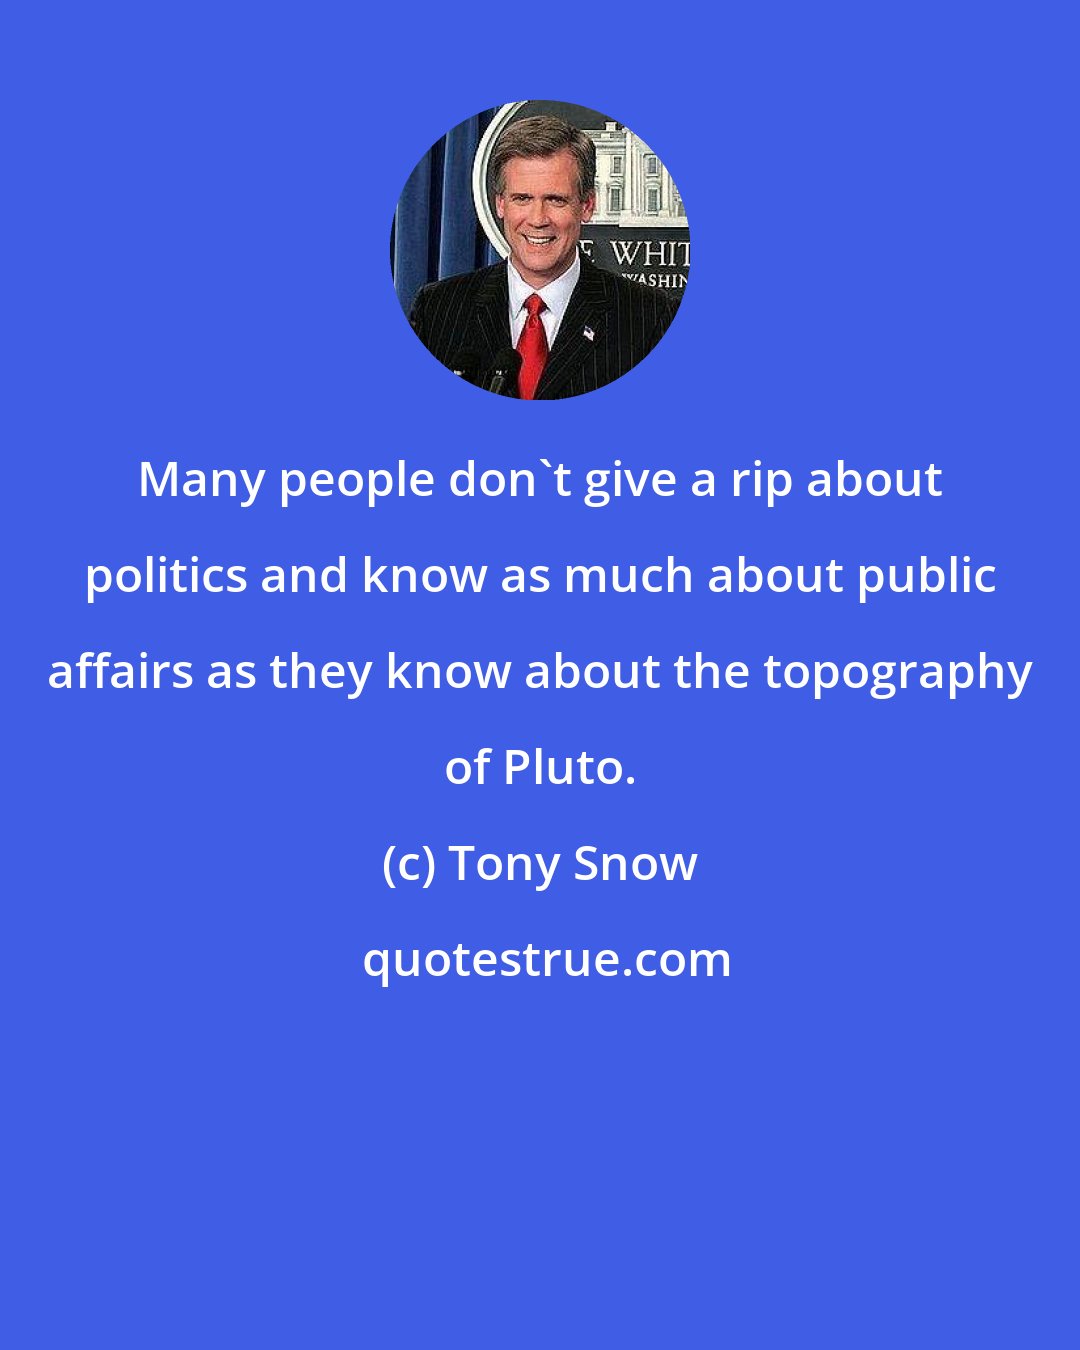 Tony Snow: Many people don't give a rip about politics and know as much about public affairs as they know about the topography of Pluto.